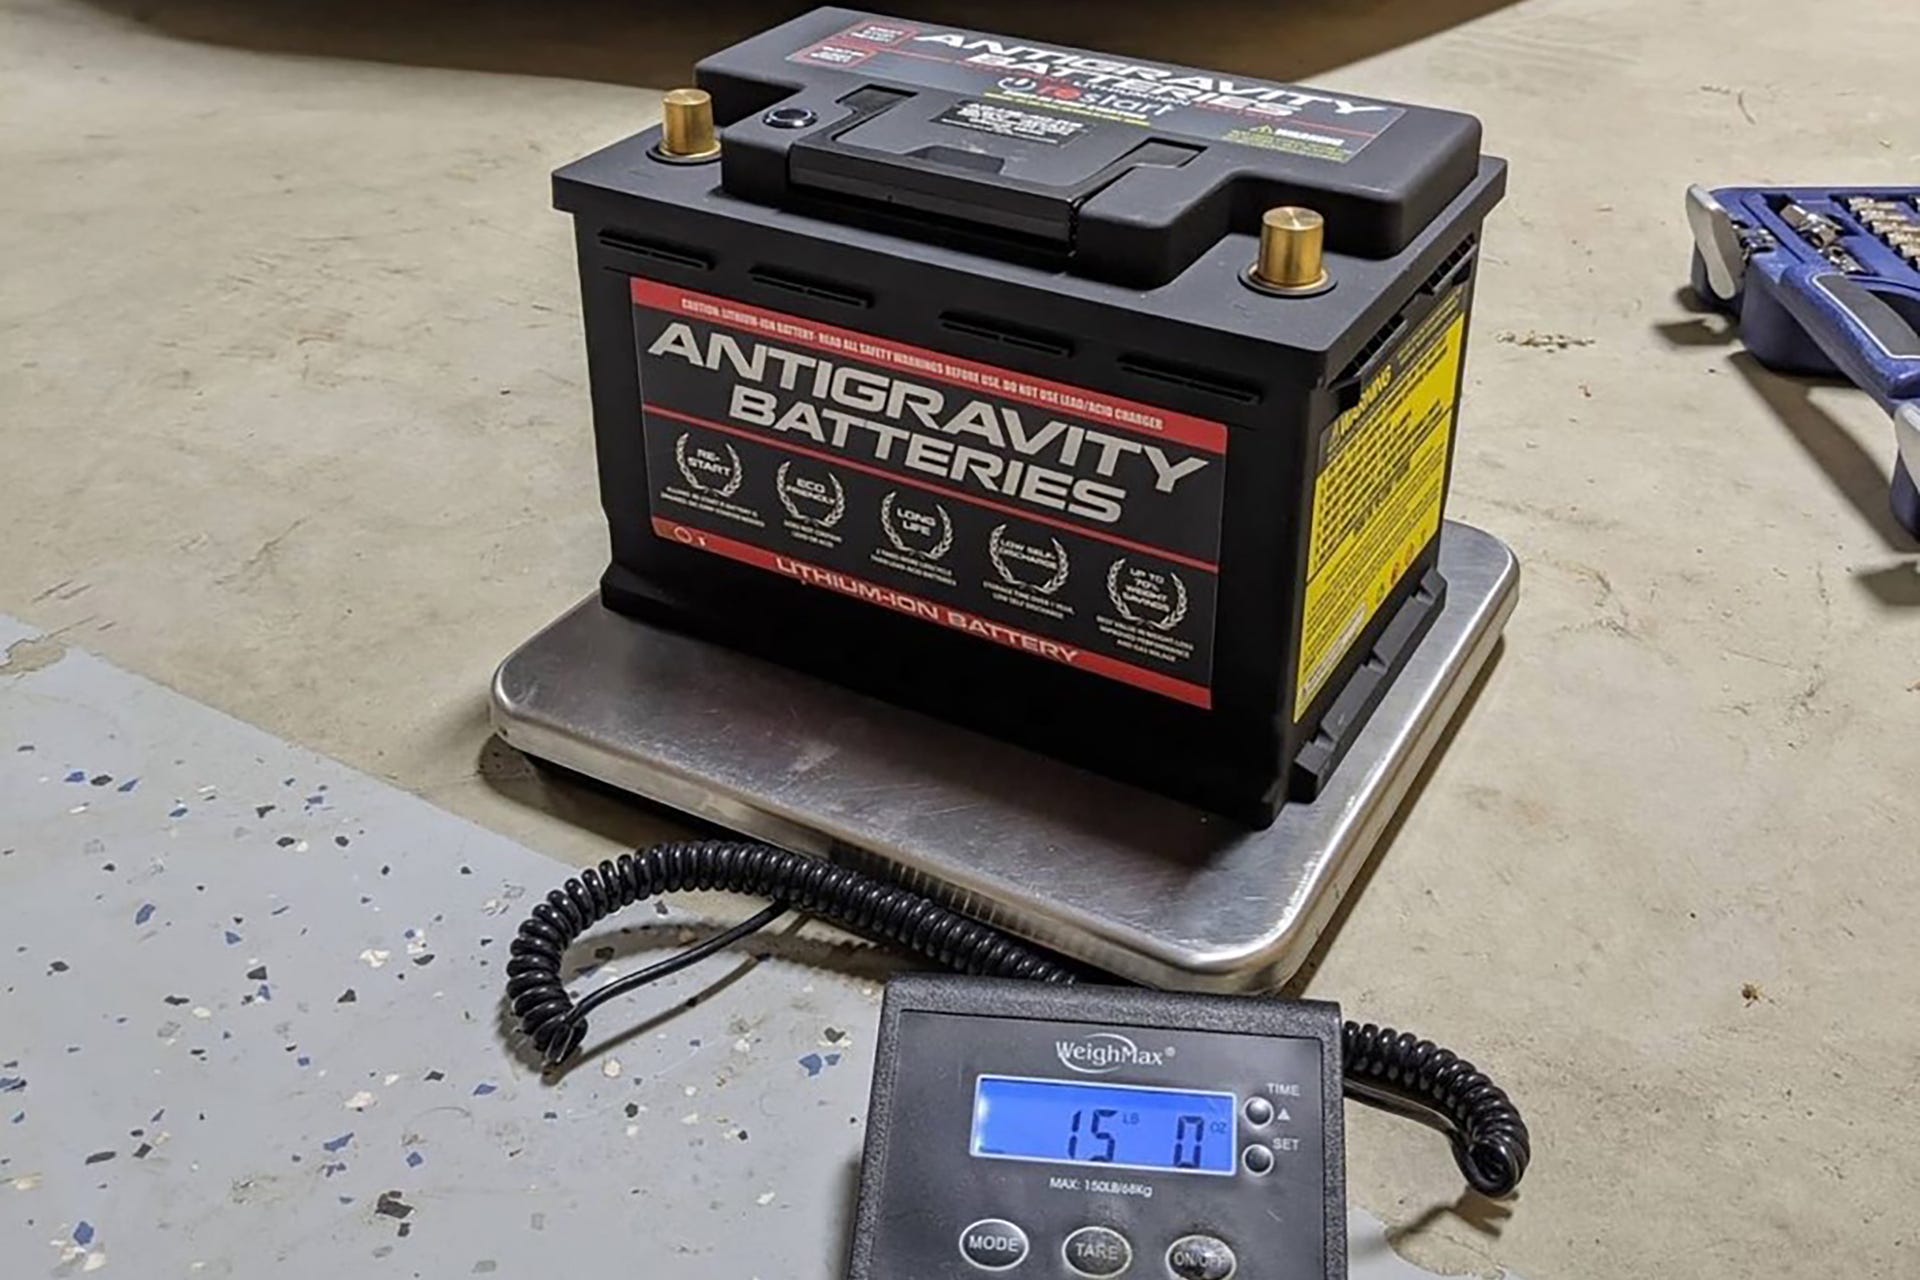 New Battery Balancer launched: Not all batteries are created equal